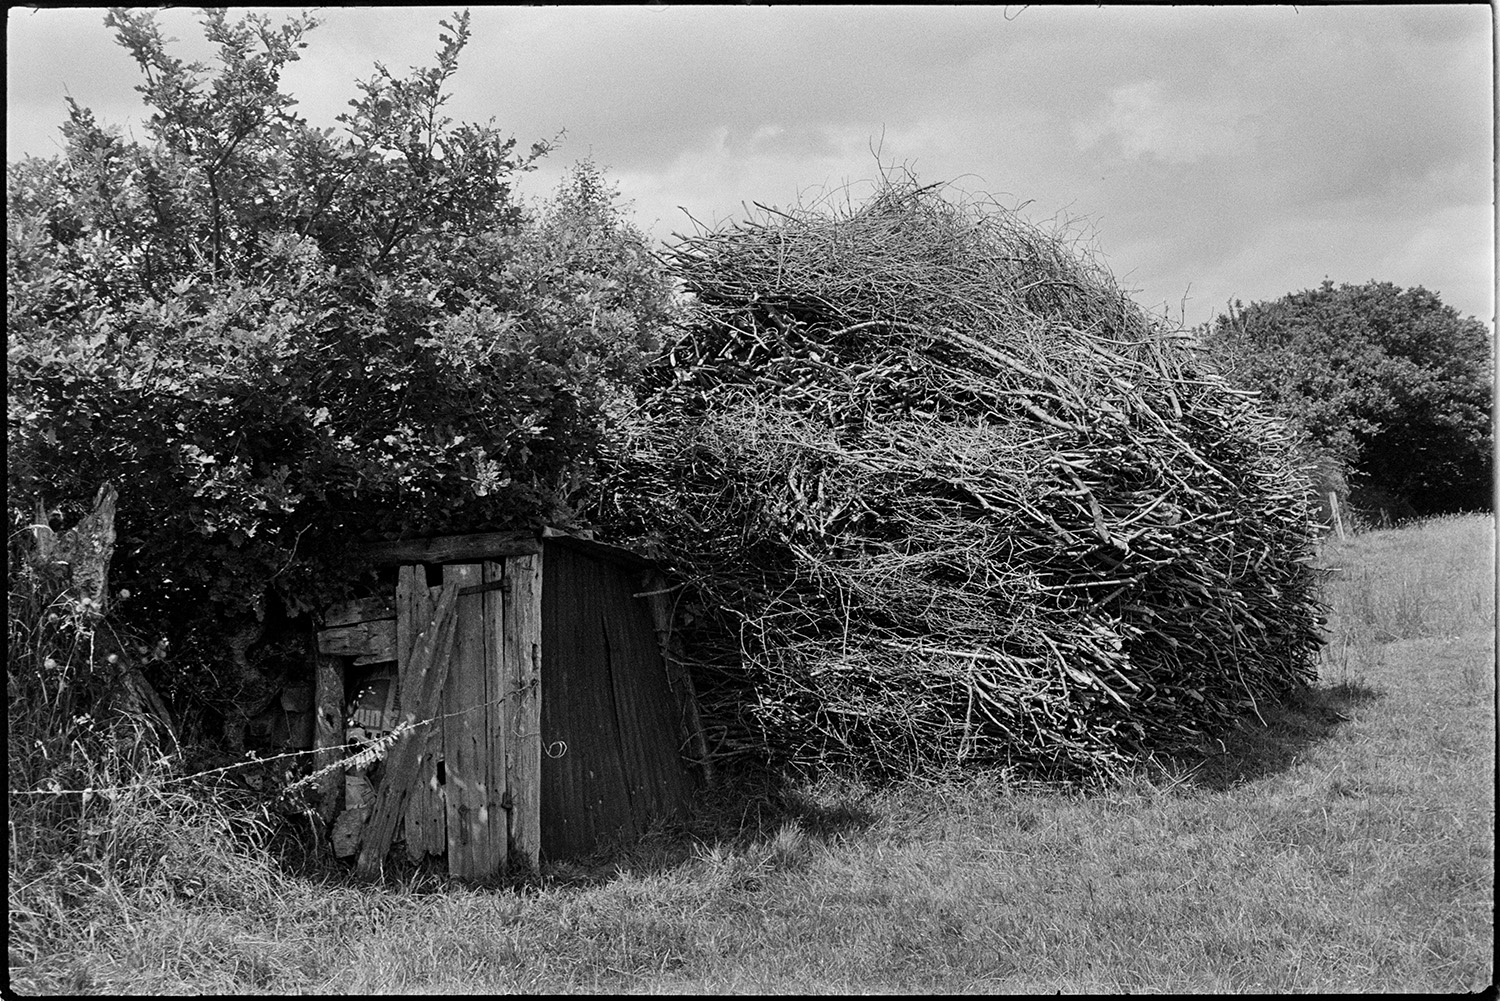 Wood rick, woodpile. <br />
[A wood rick or a wood pile in a field next to a ramshackle wooden and corrugated iron shed, at Rectory Road, Dolton.]